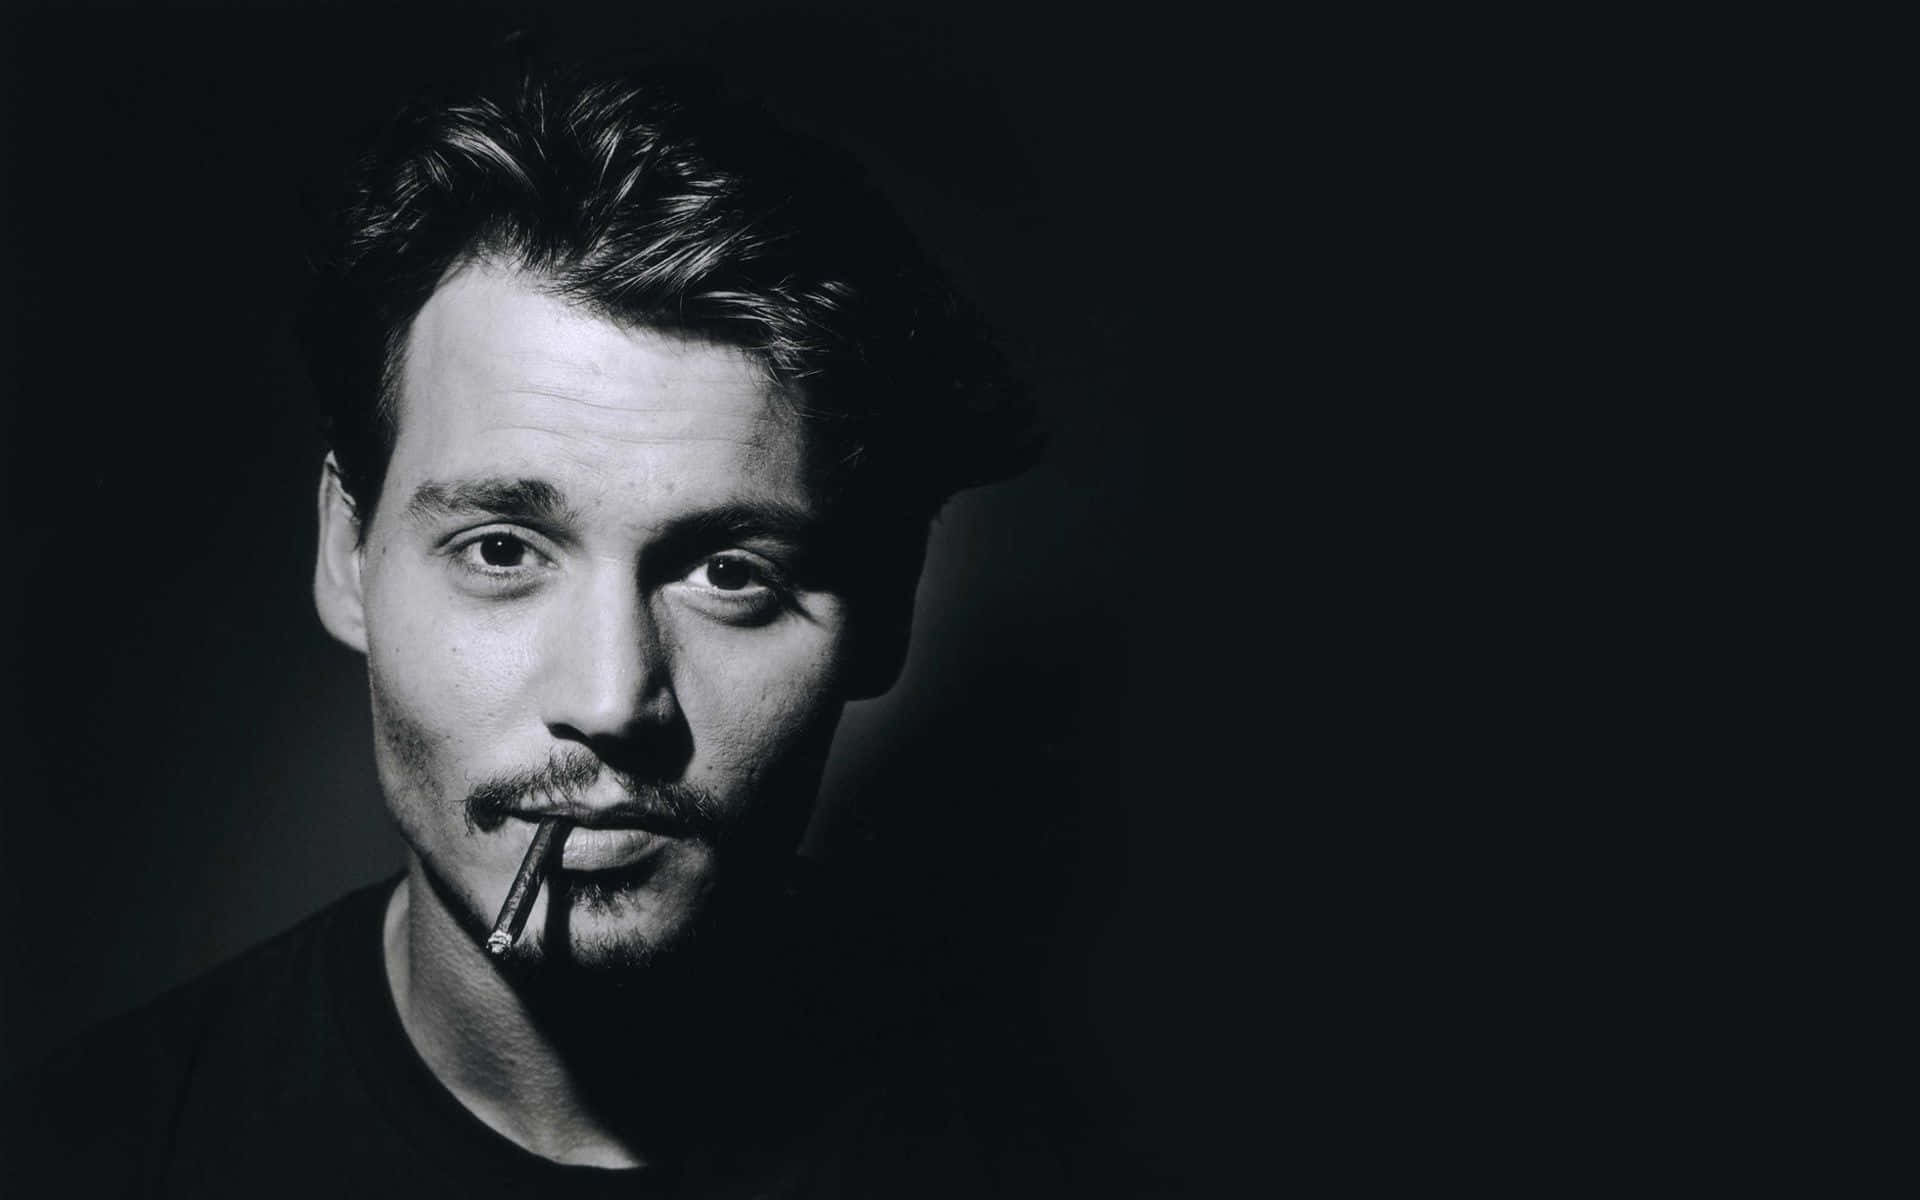 Johnny Depp, Actor and renowned Hollywood Icon